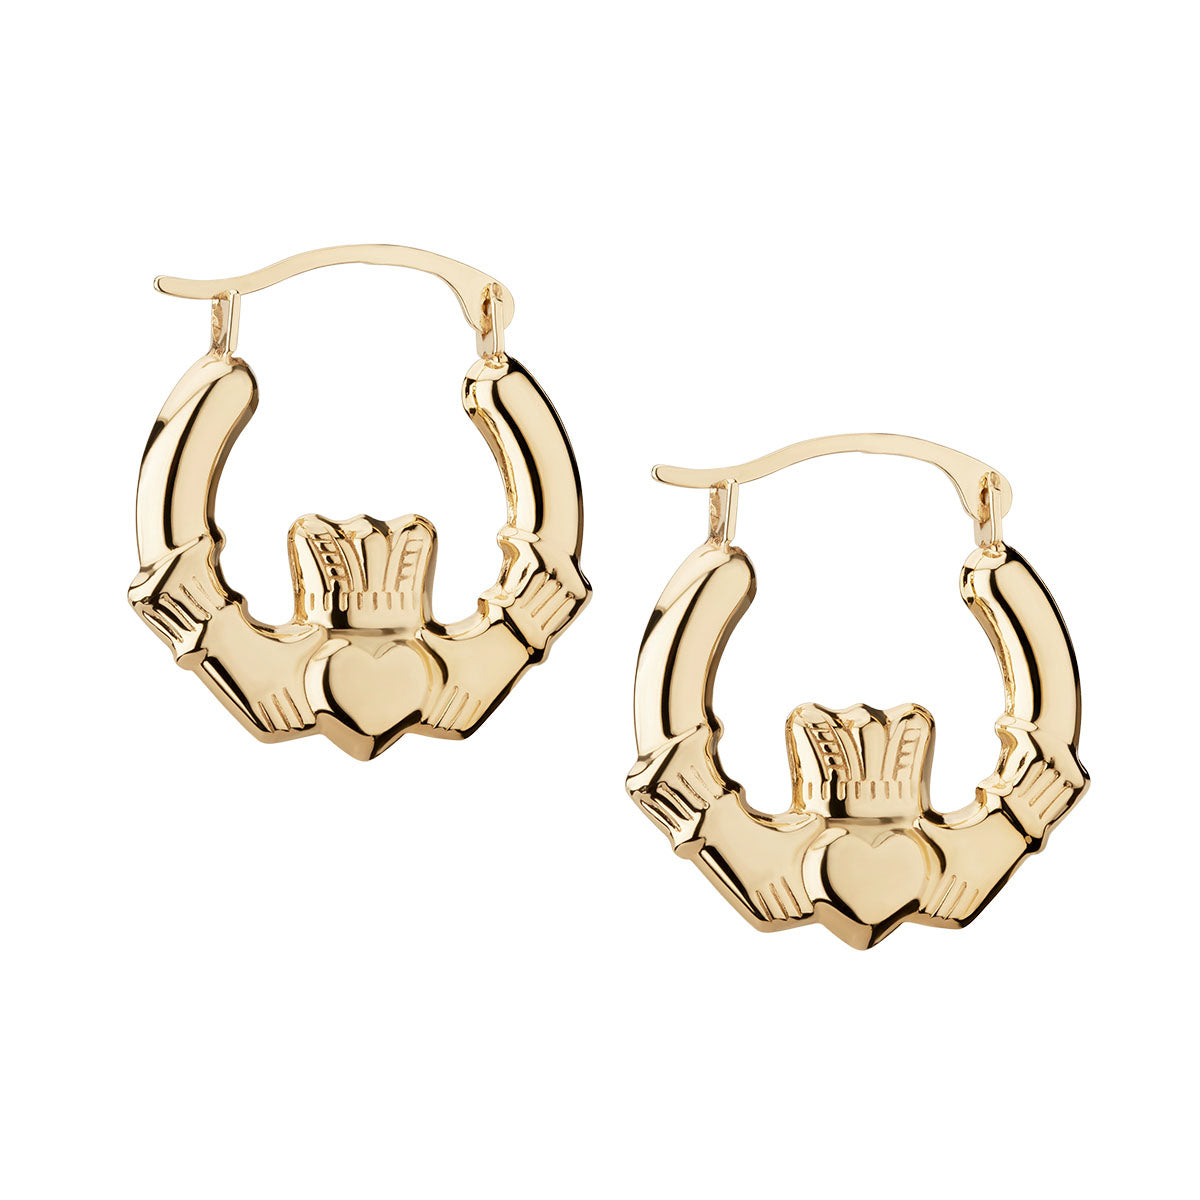 10k gold claddagh creole small earrings s3939 from Solvar